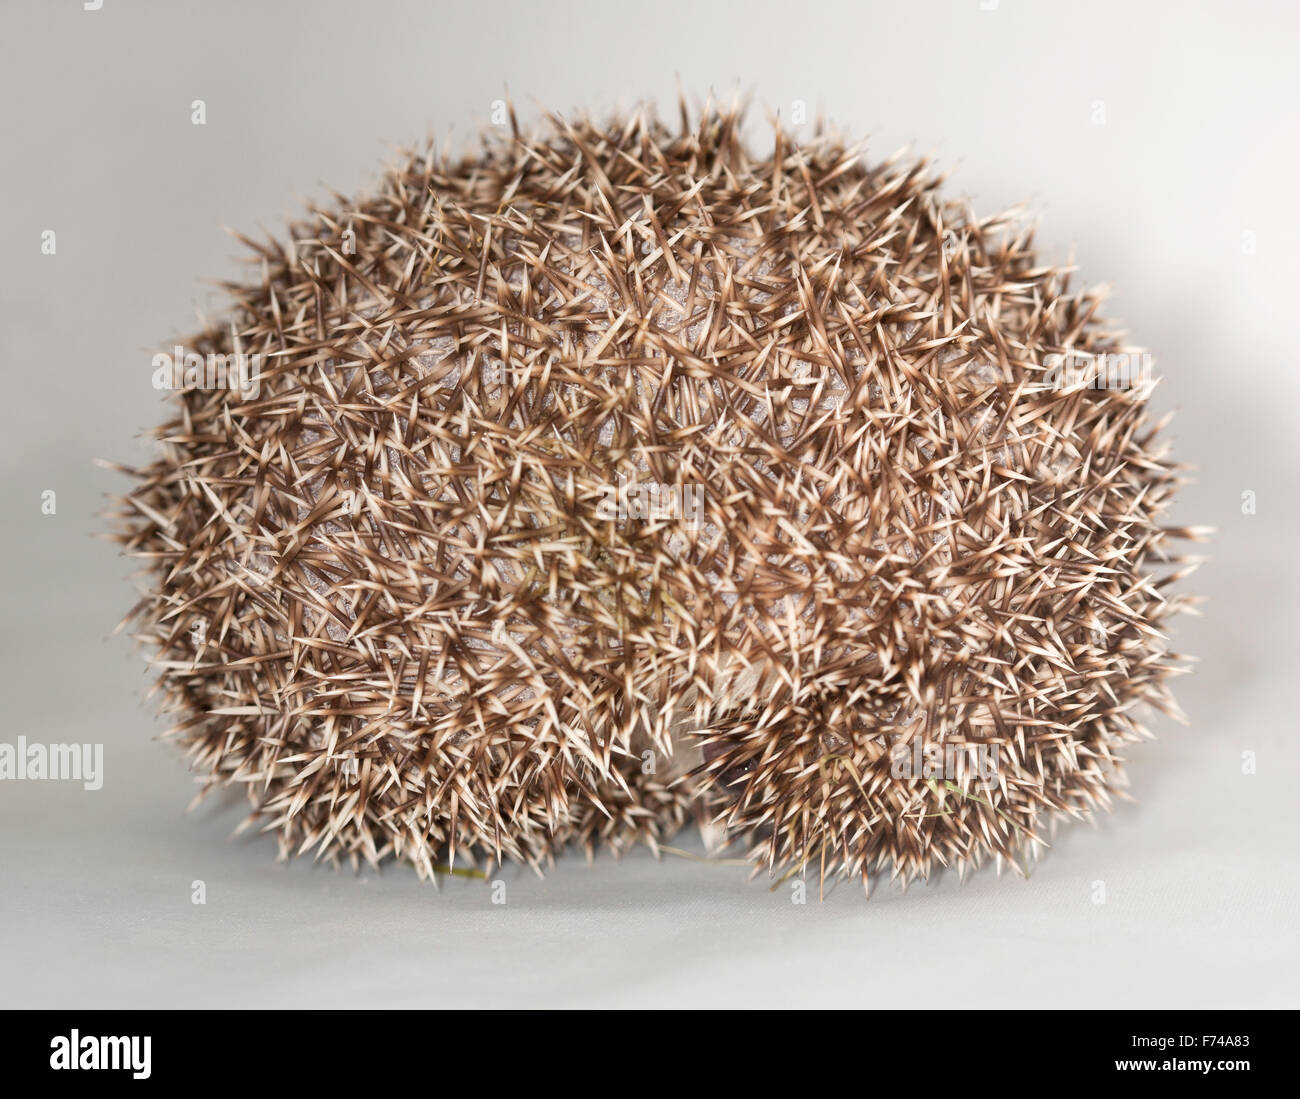 African Pygmy Hedgehog curled in ball Stock Photo